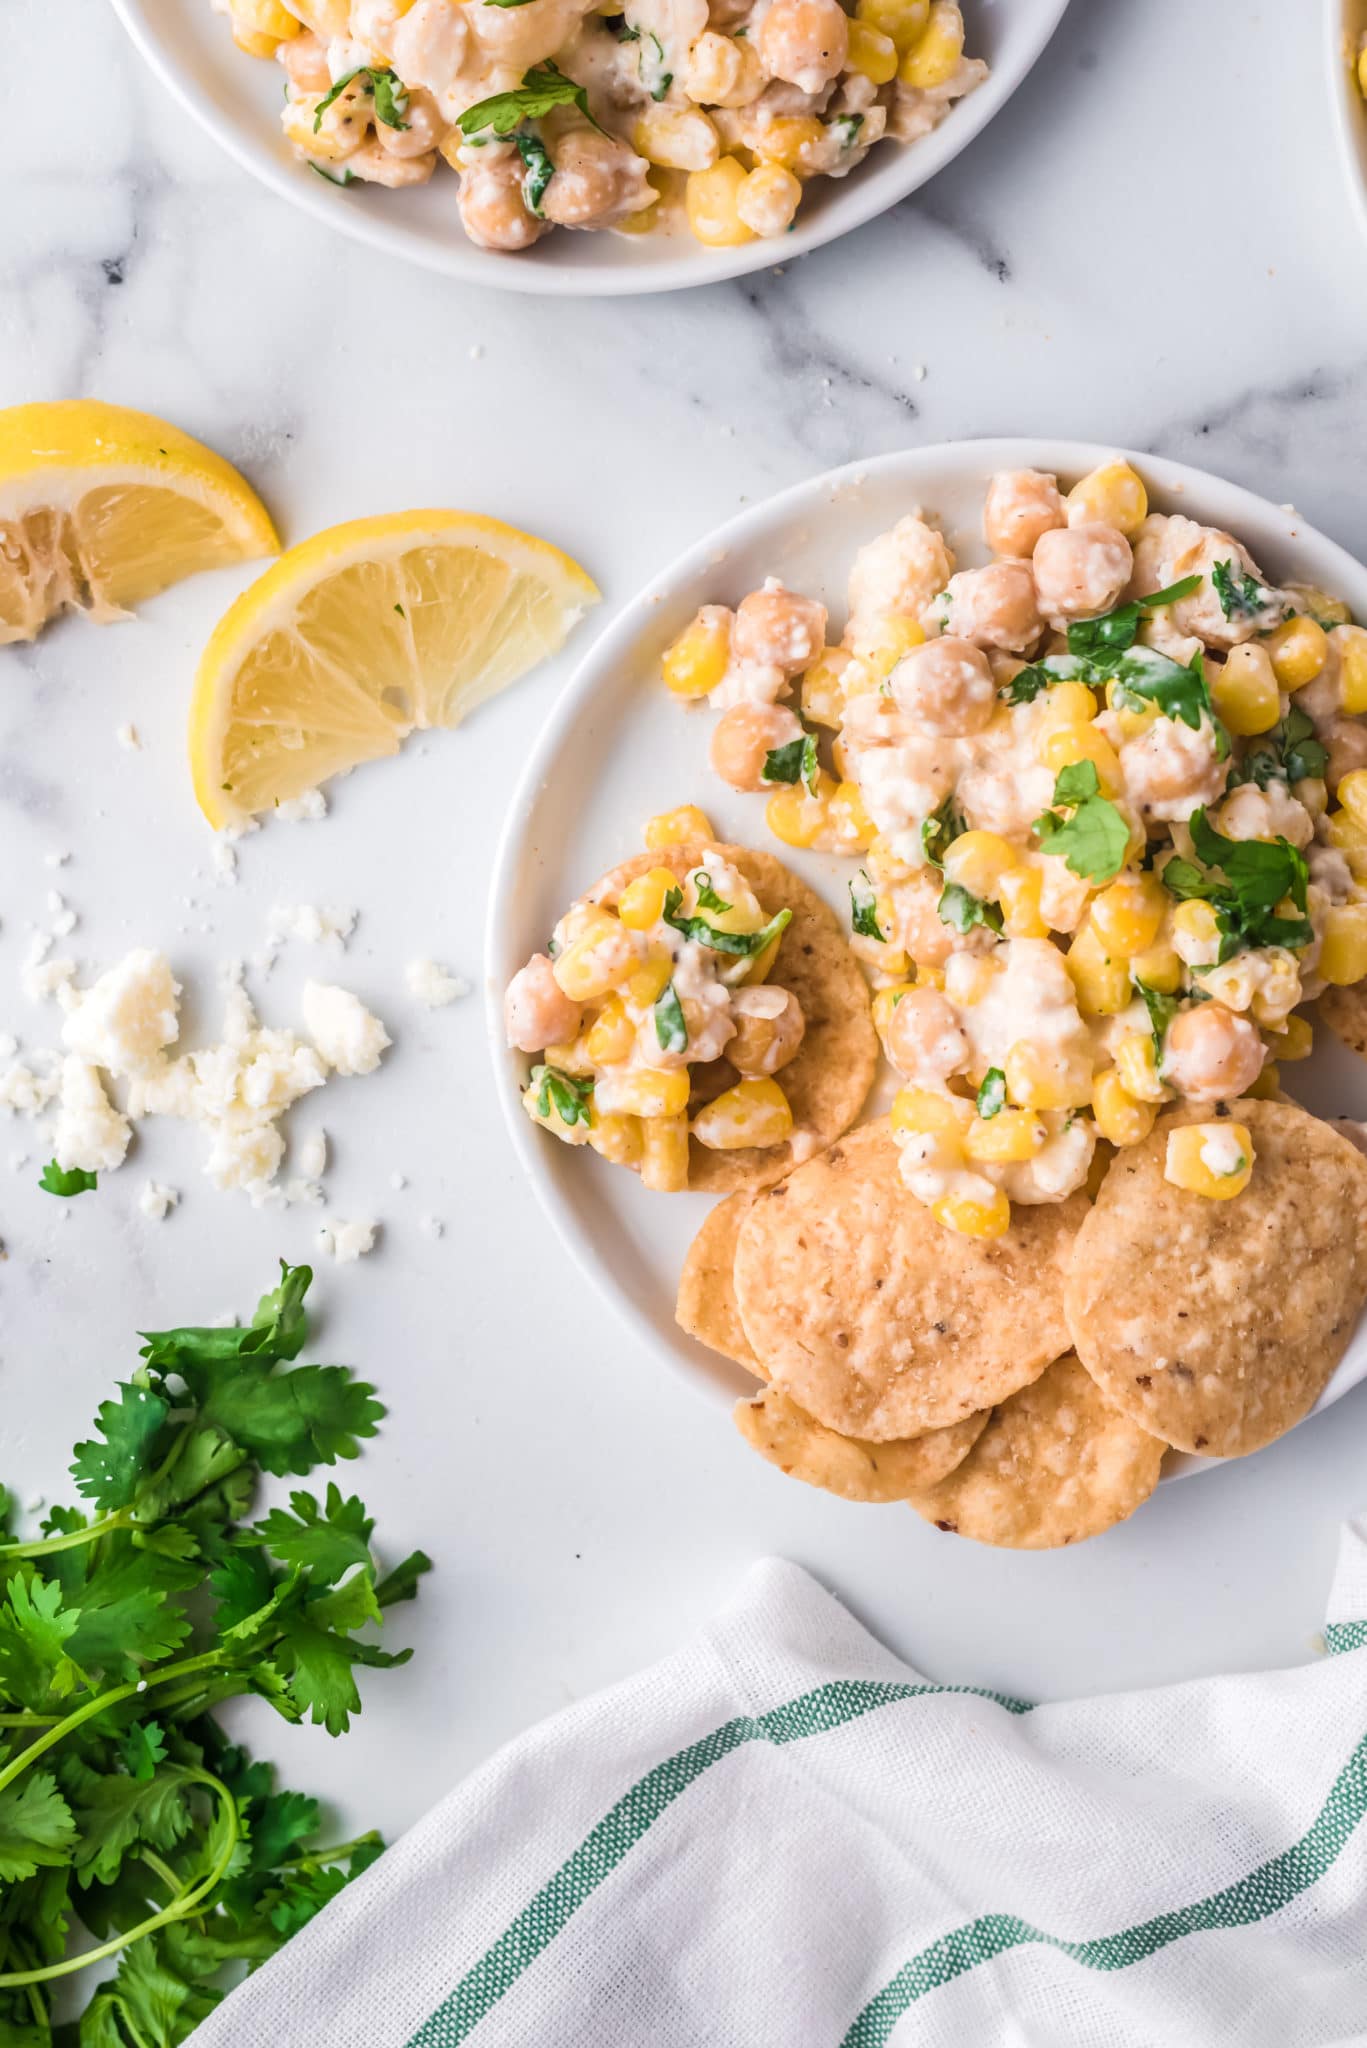 Corn and Chickpea Dip | A Zesty Bite